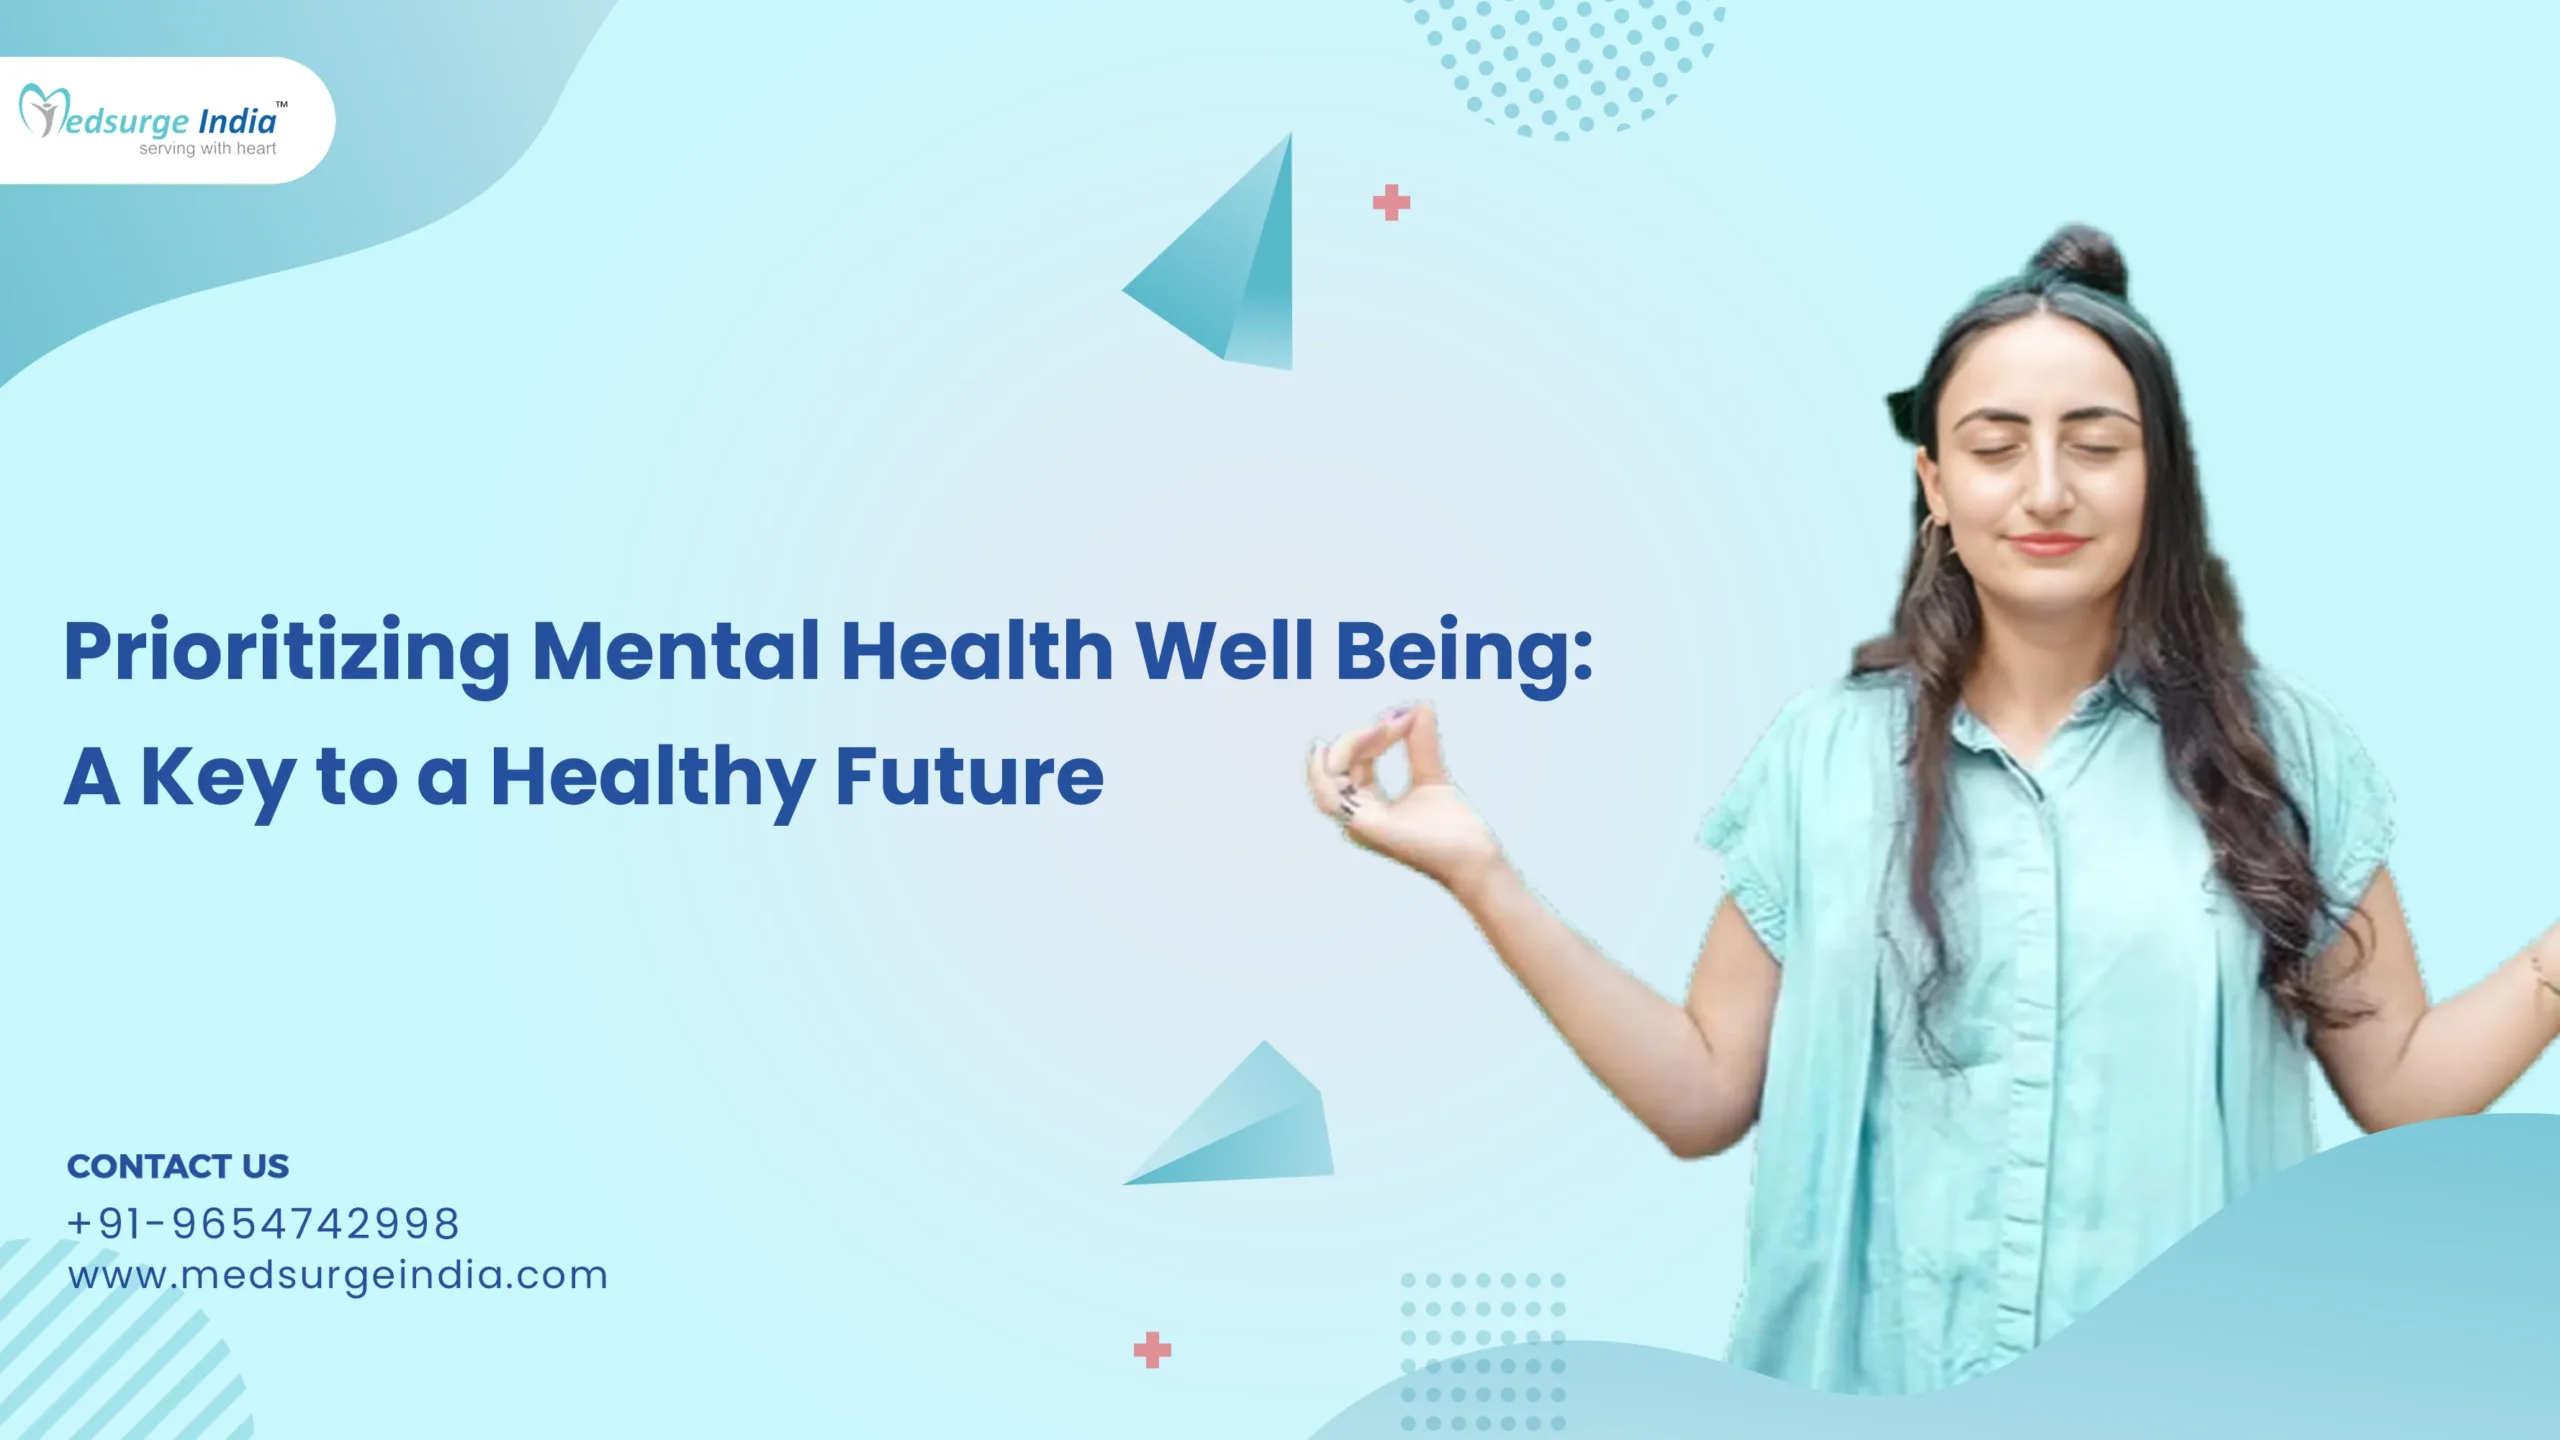 Prioritizing Mental Health Well Being